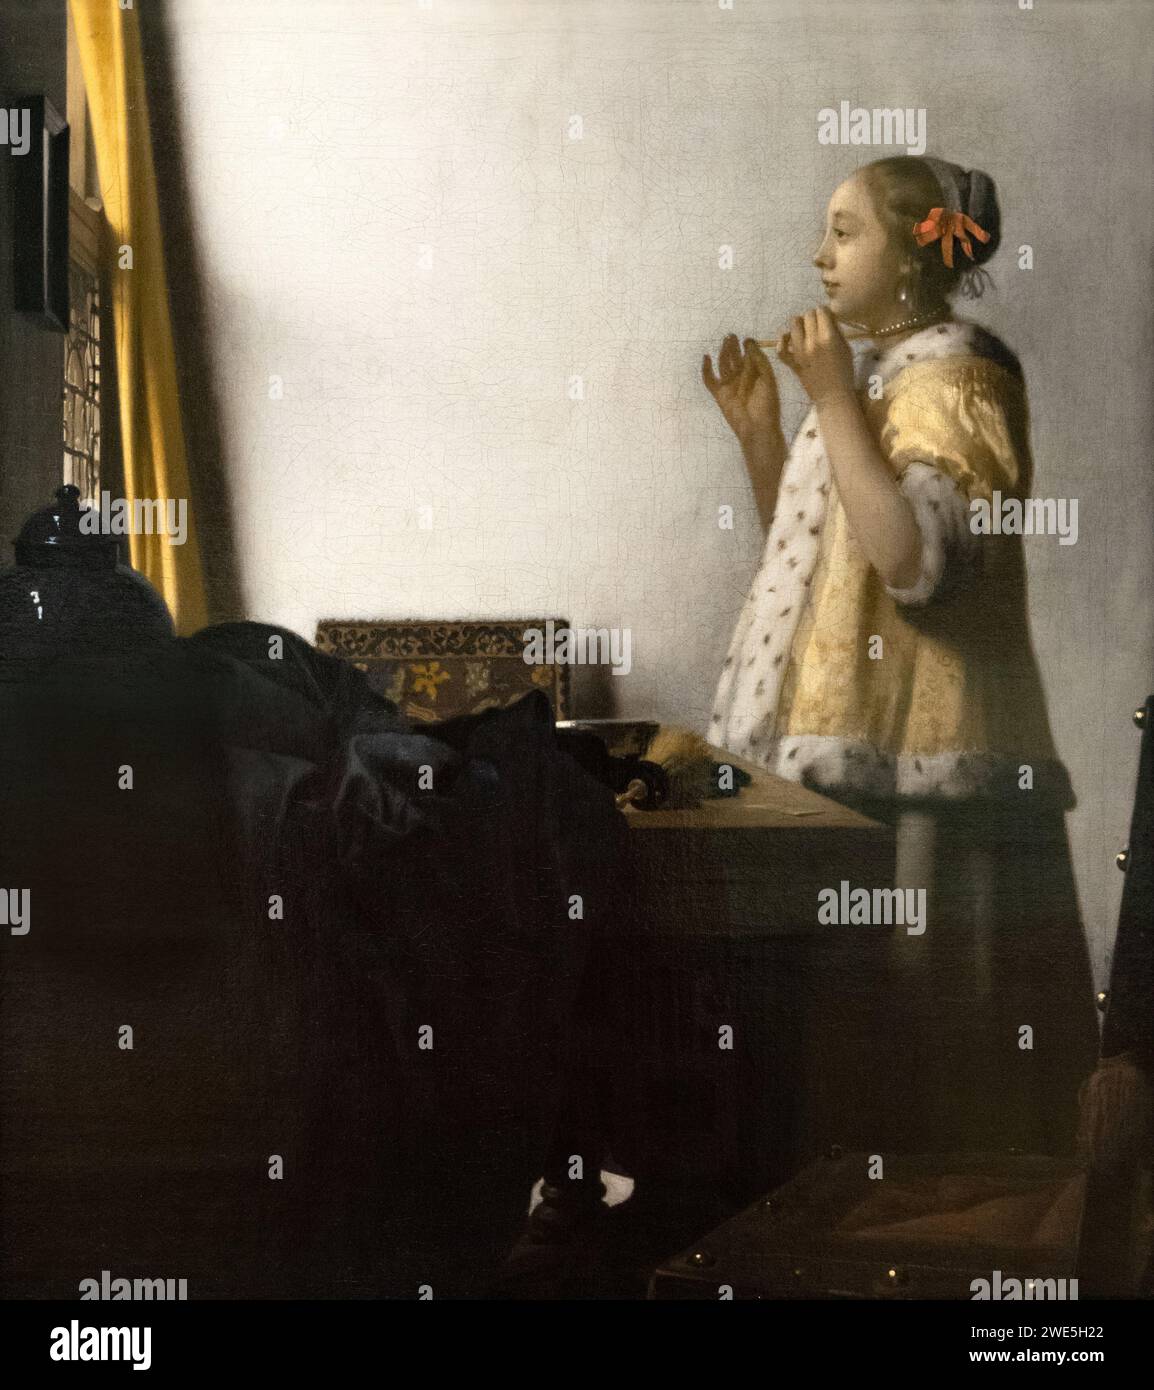 Johannes Vermeer painting; 'Woman with a Pearl Necklace' or 'The Pearl Necklace', 1664, Oil on Canvas, 17th century Dutch Golden Age painting Stock Photo